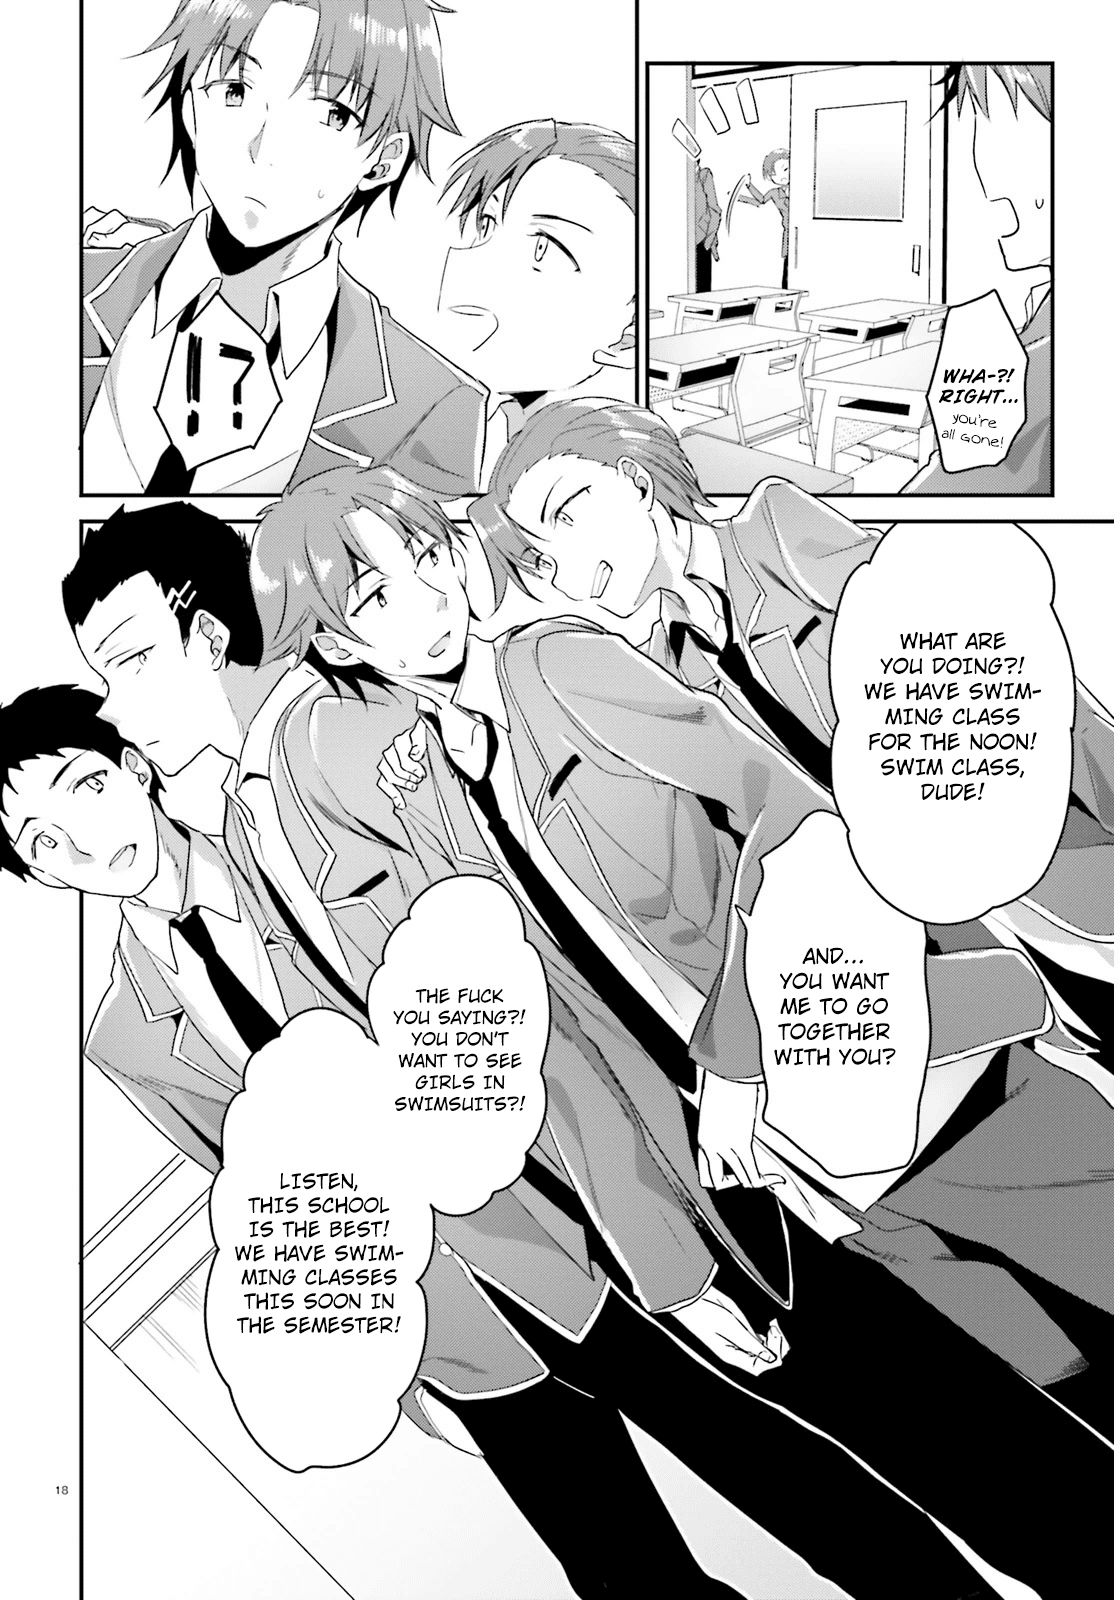 Classroom of the Elite, Chapter 3 - Classroom of the Elite Manga Online